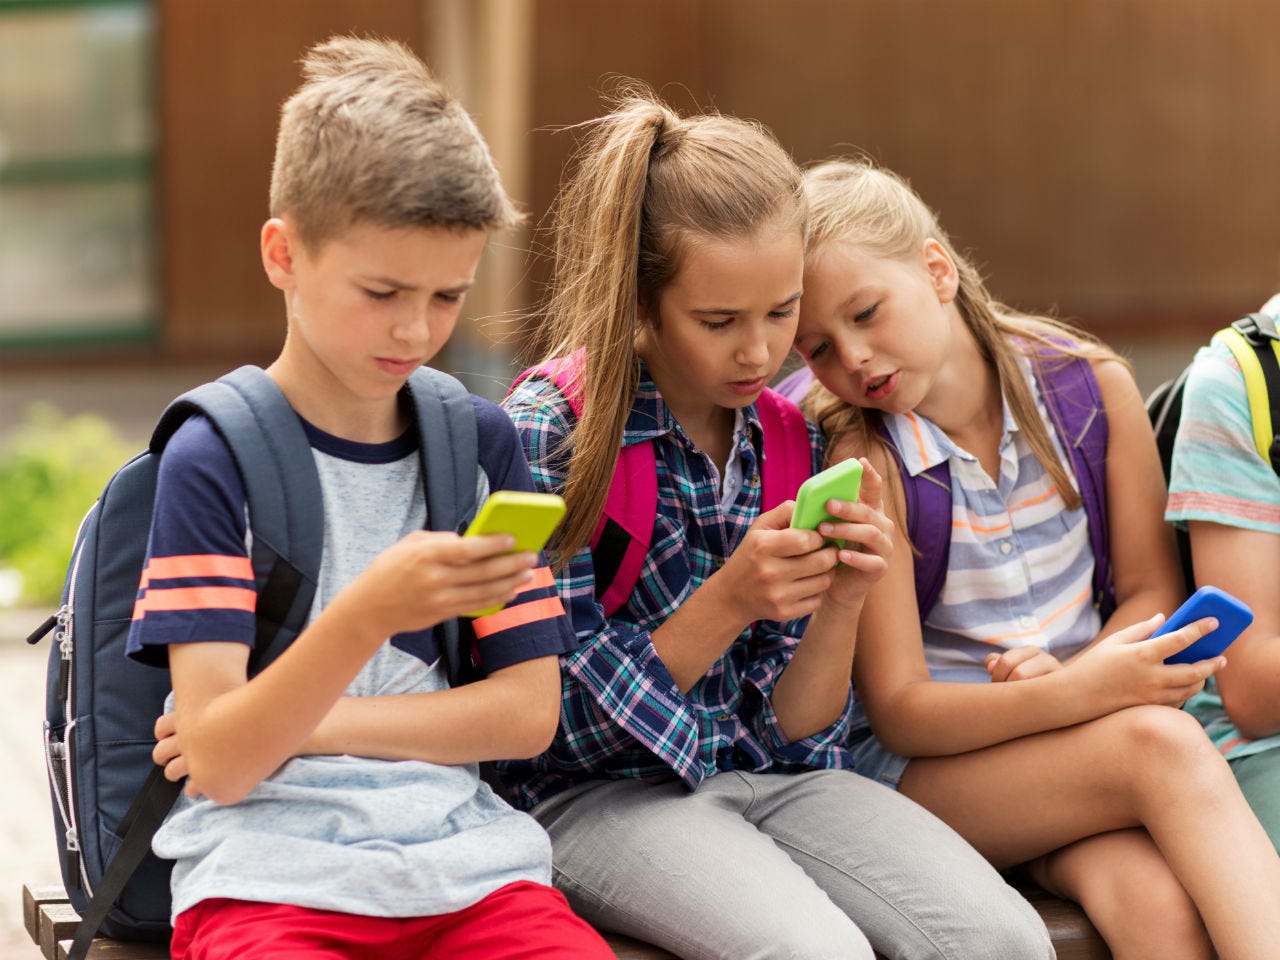 Even Apple investors are concerned about your kids&#39; screen time